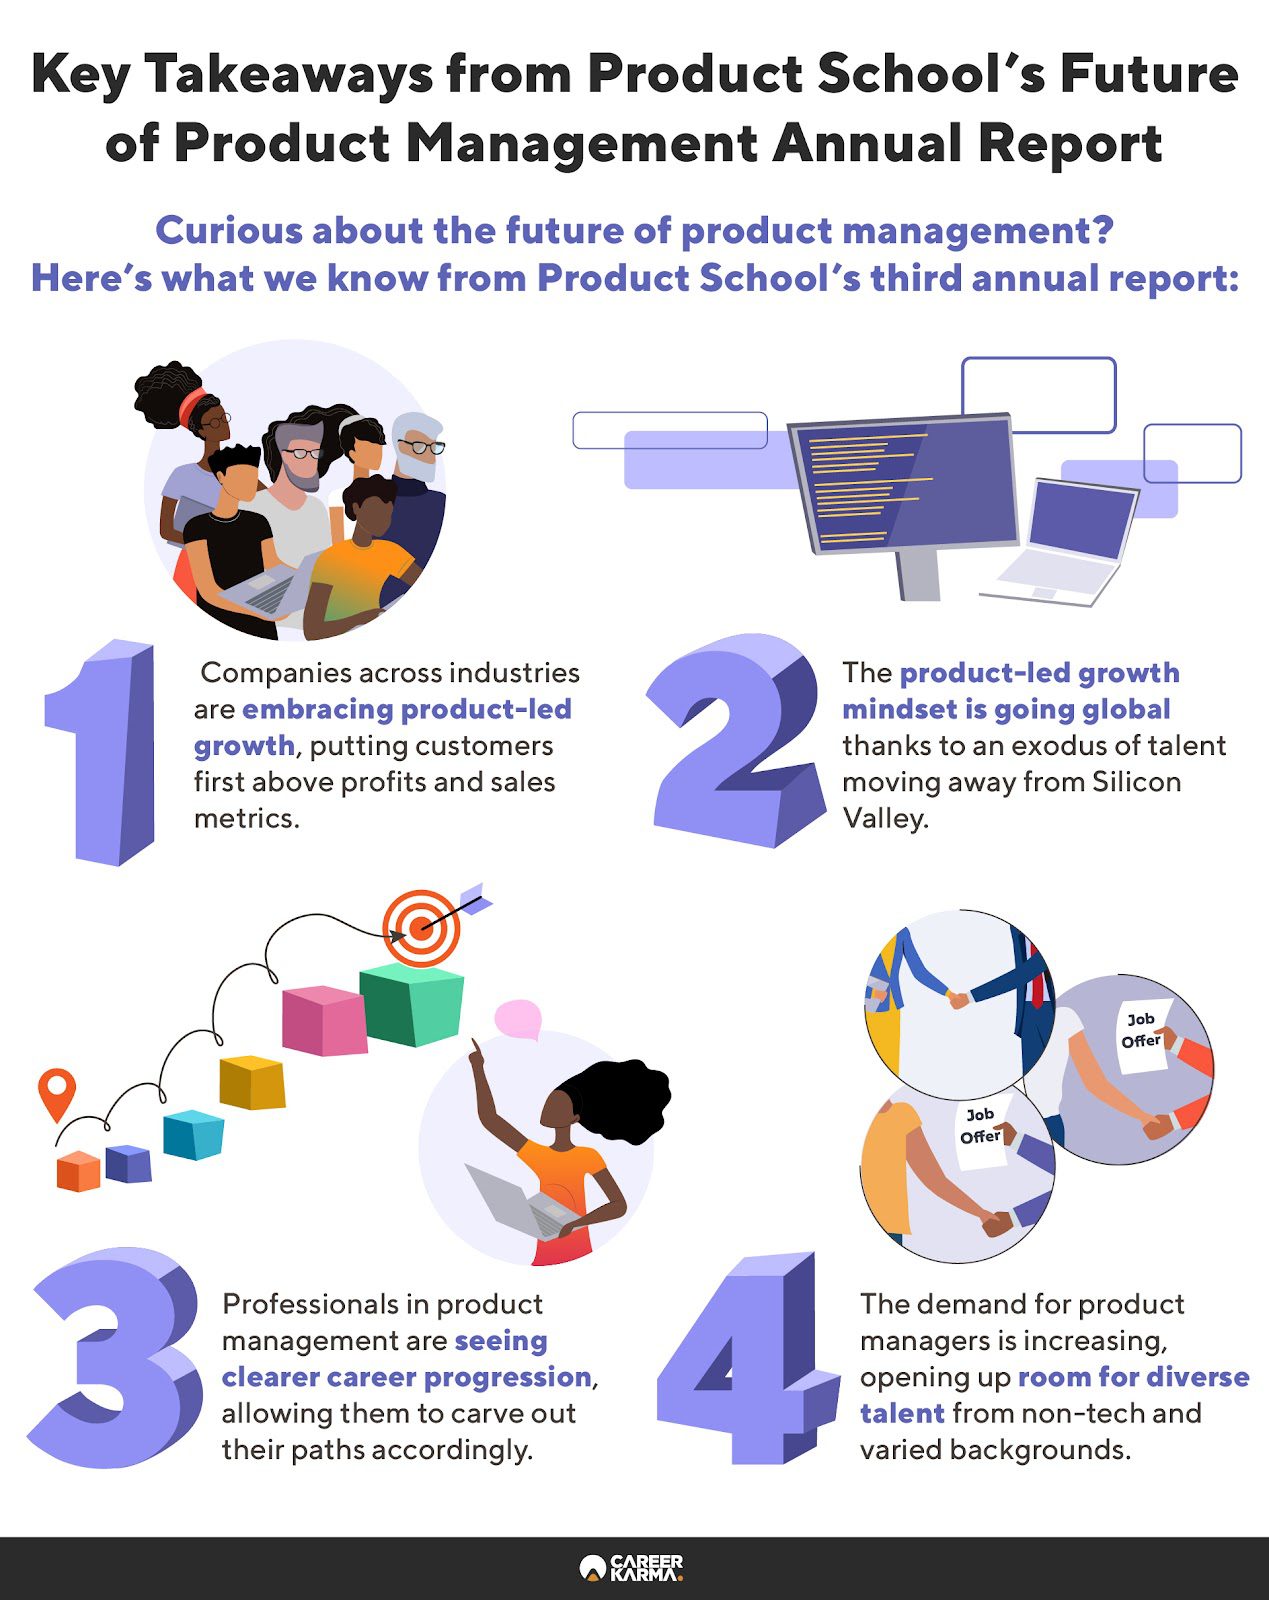 An infographic showing a summary of product management trends from Product School’s 2022 Future of Product Management Report 